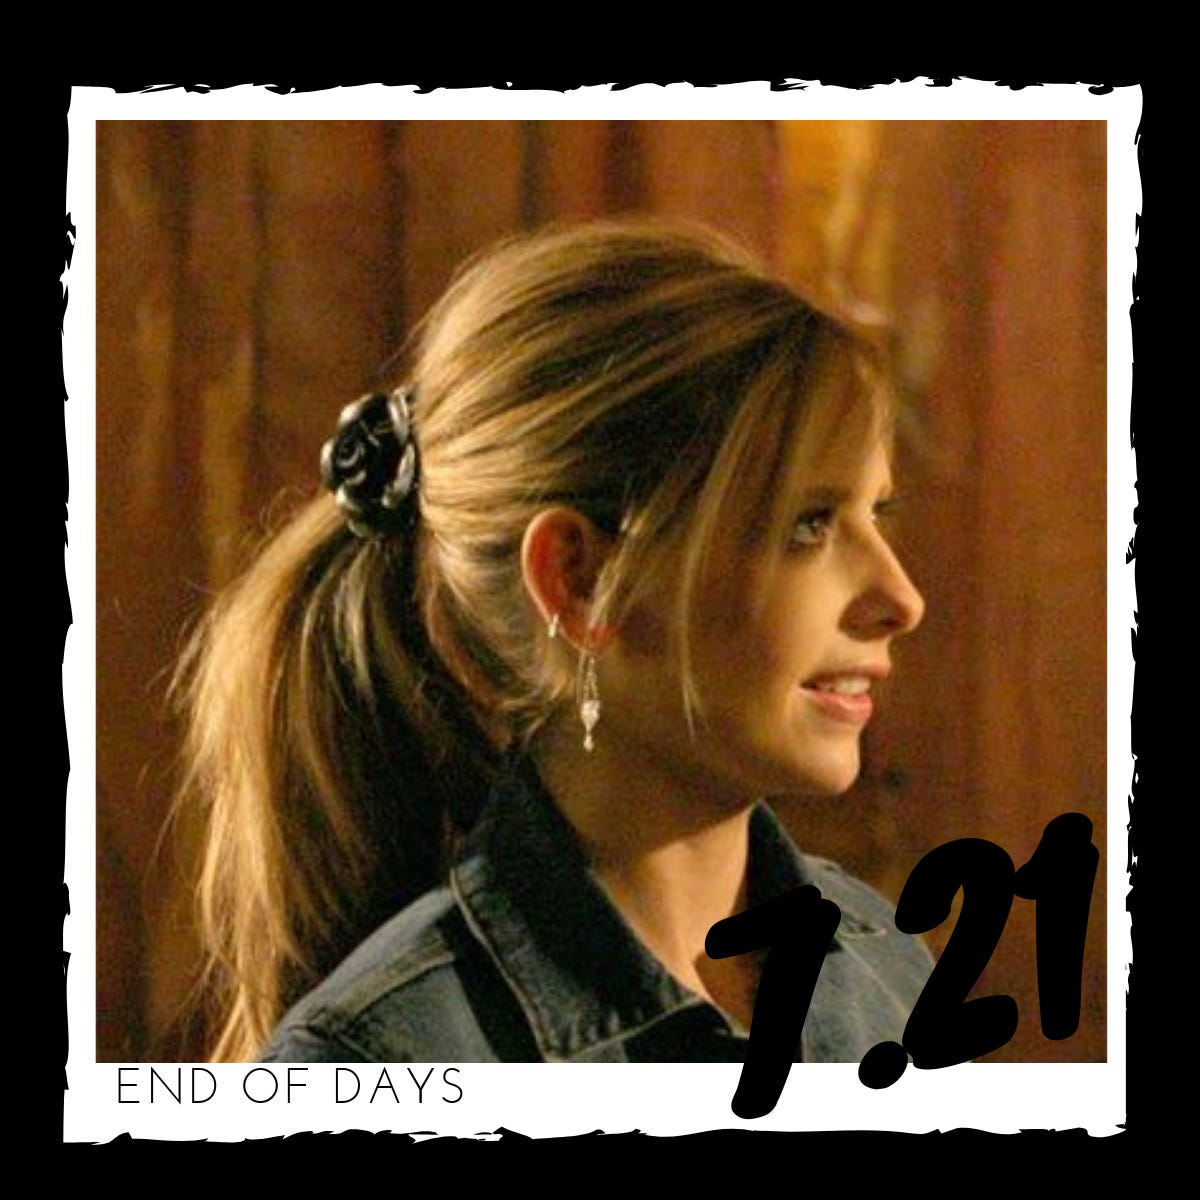 7.21 – "End of Days"